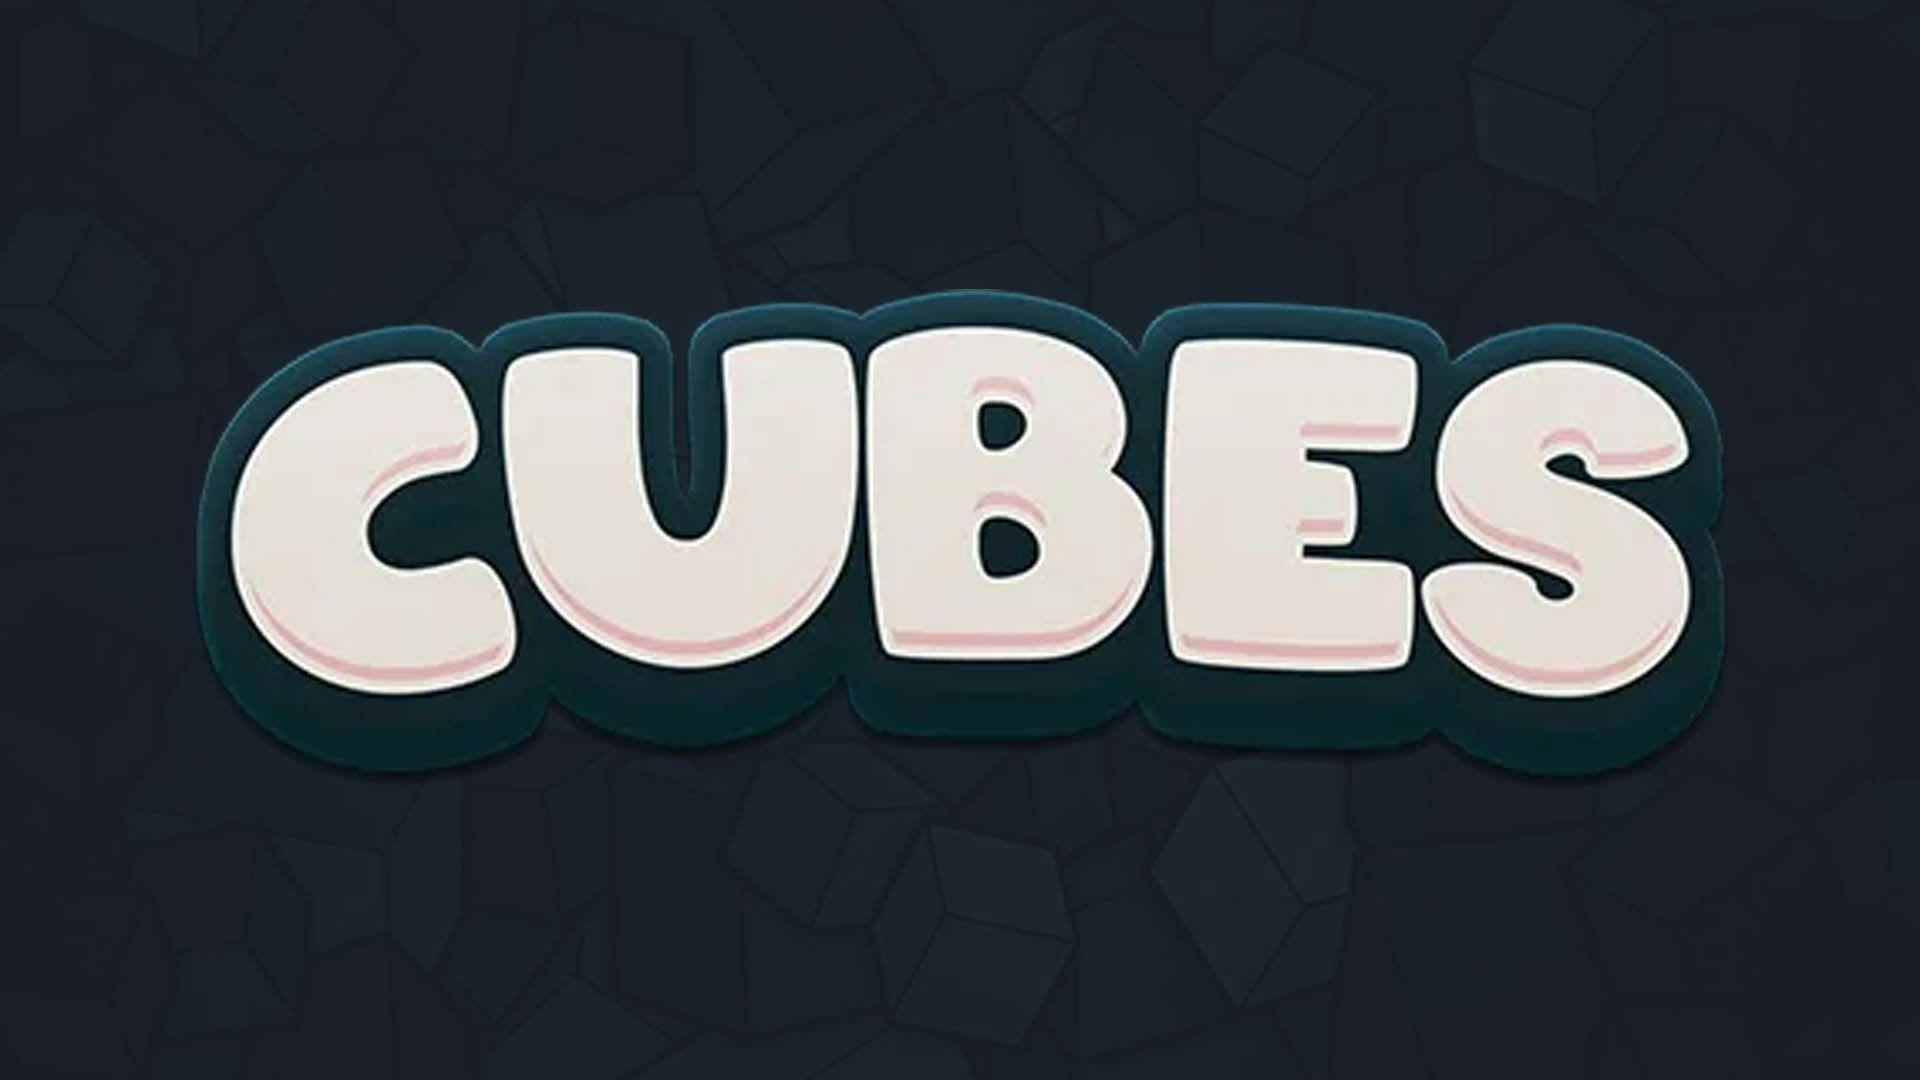 Cubes Slot Machine Online Free Game Play